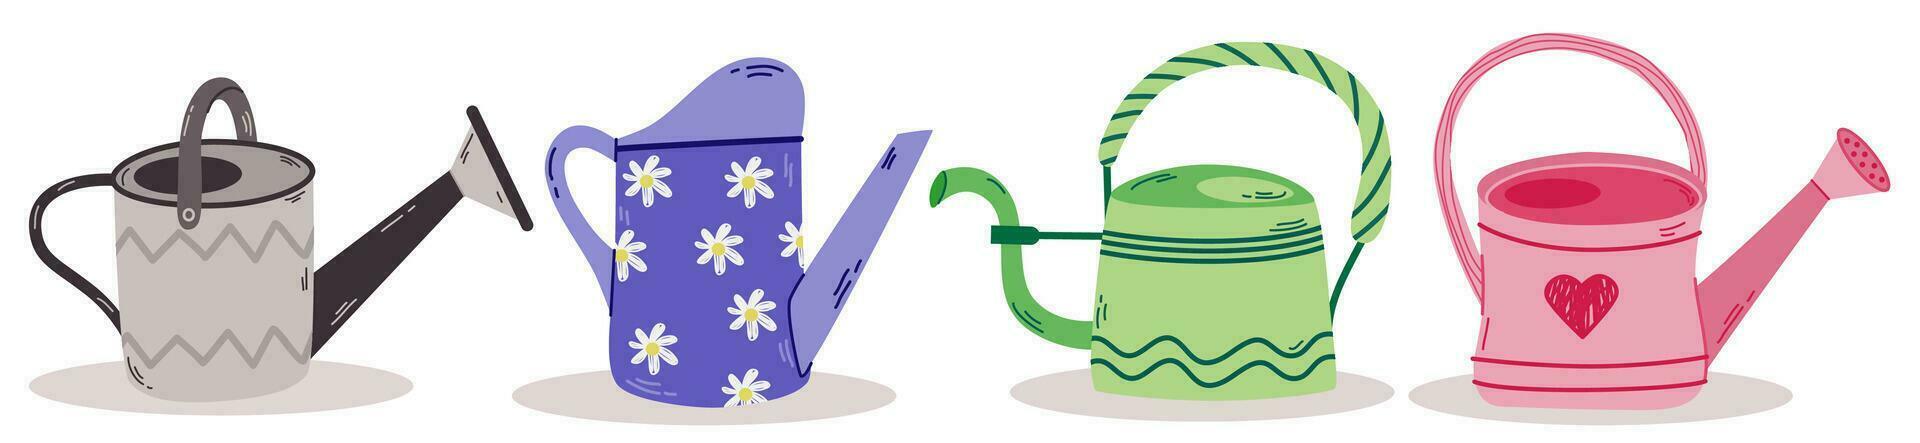 Set of colorful cartoon watering cans. Gardening tools to water the plants and flowers.Seasonal symbols. Suitable for scrapbooking, greeting card, stickers, flower shop. vector